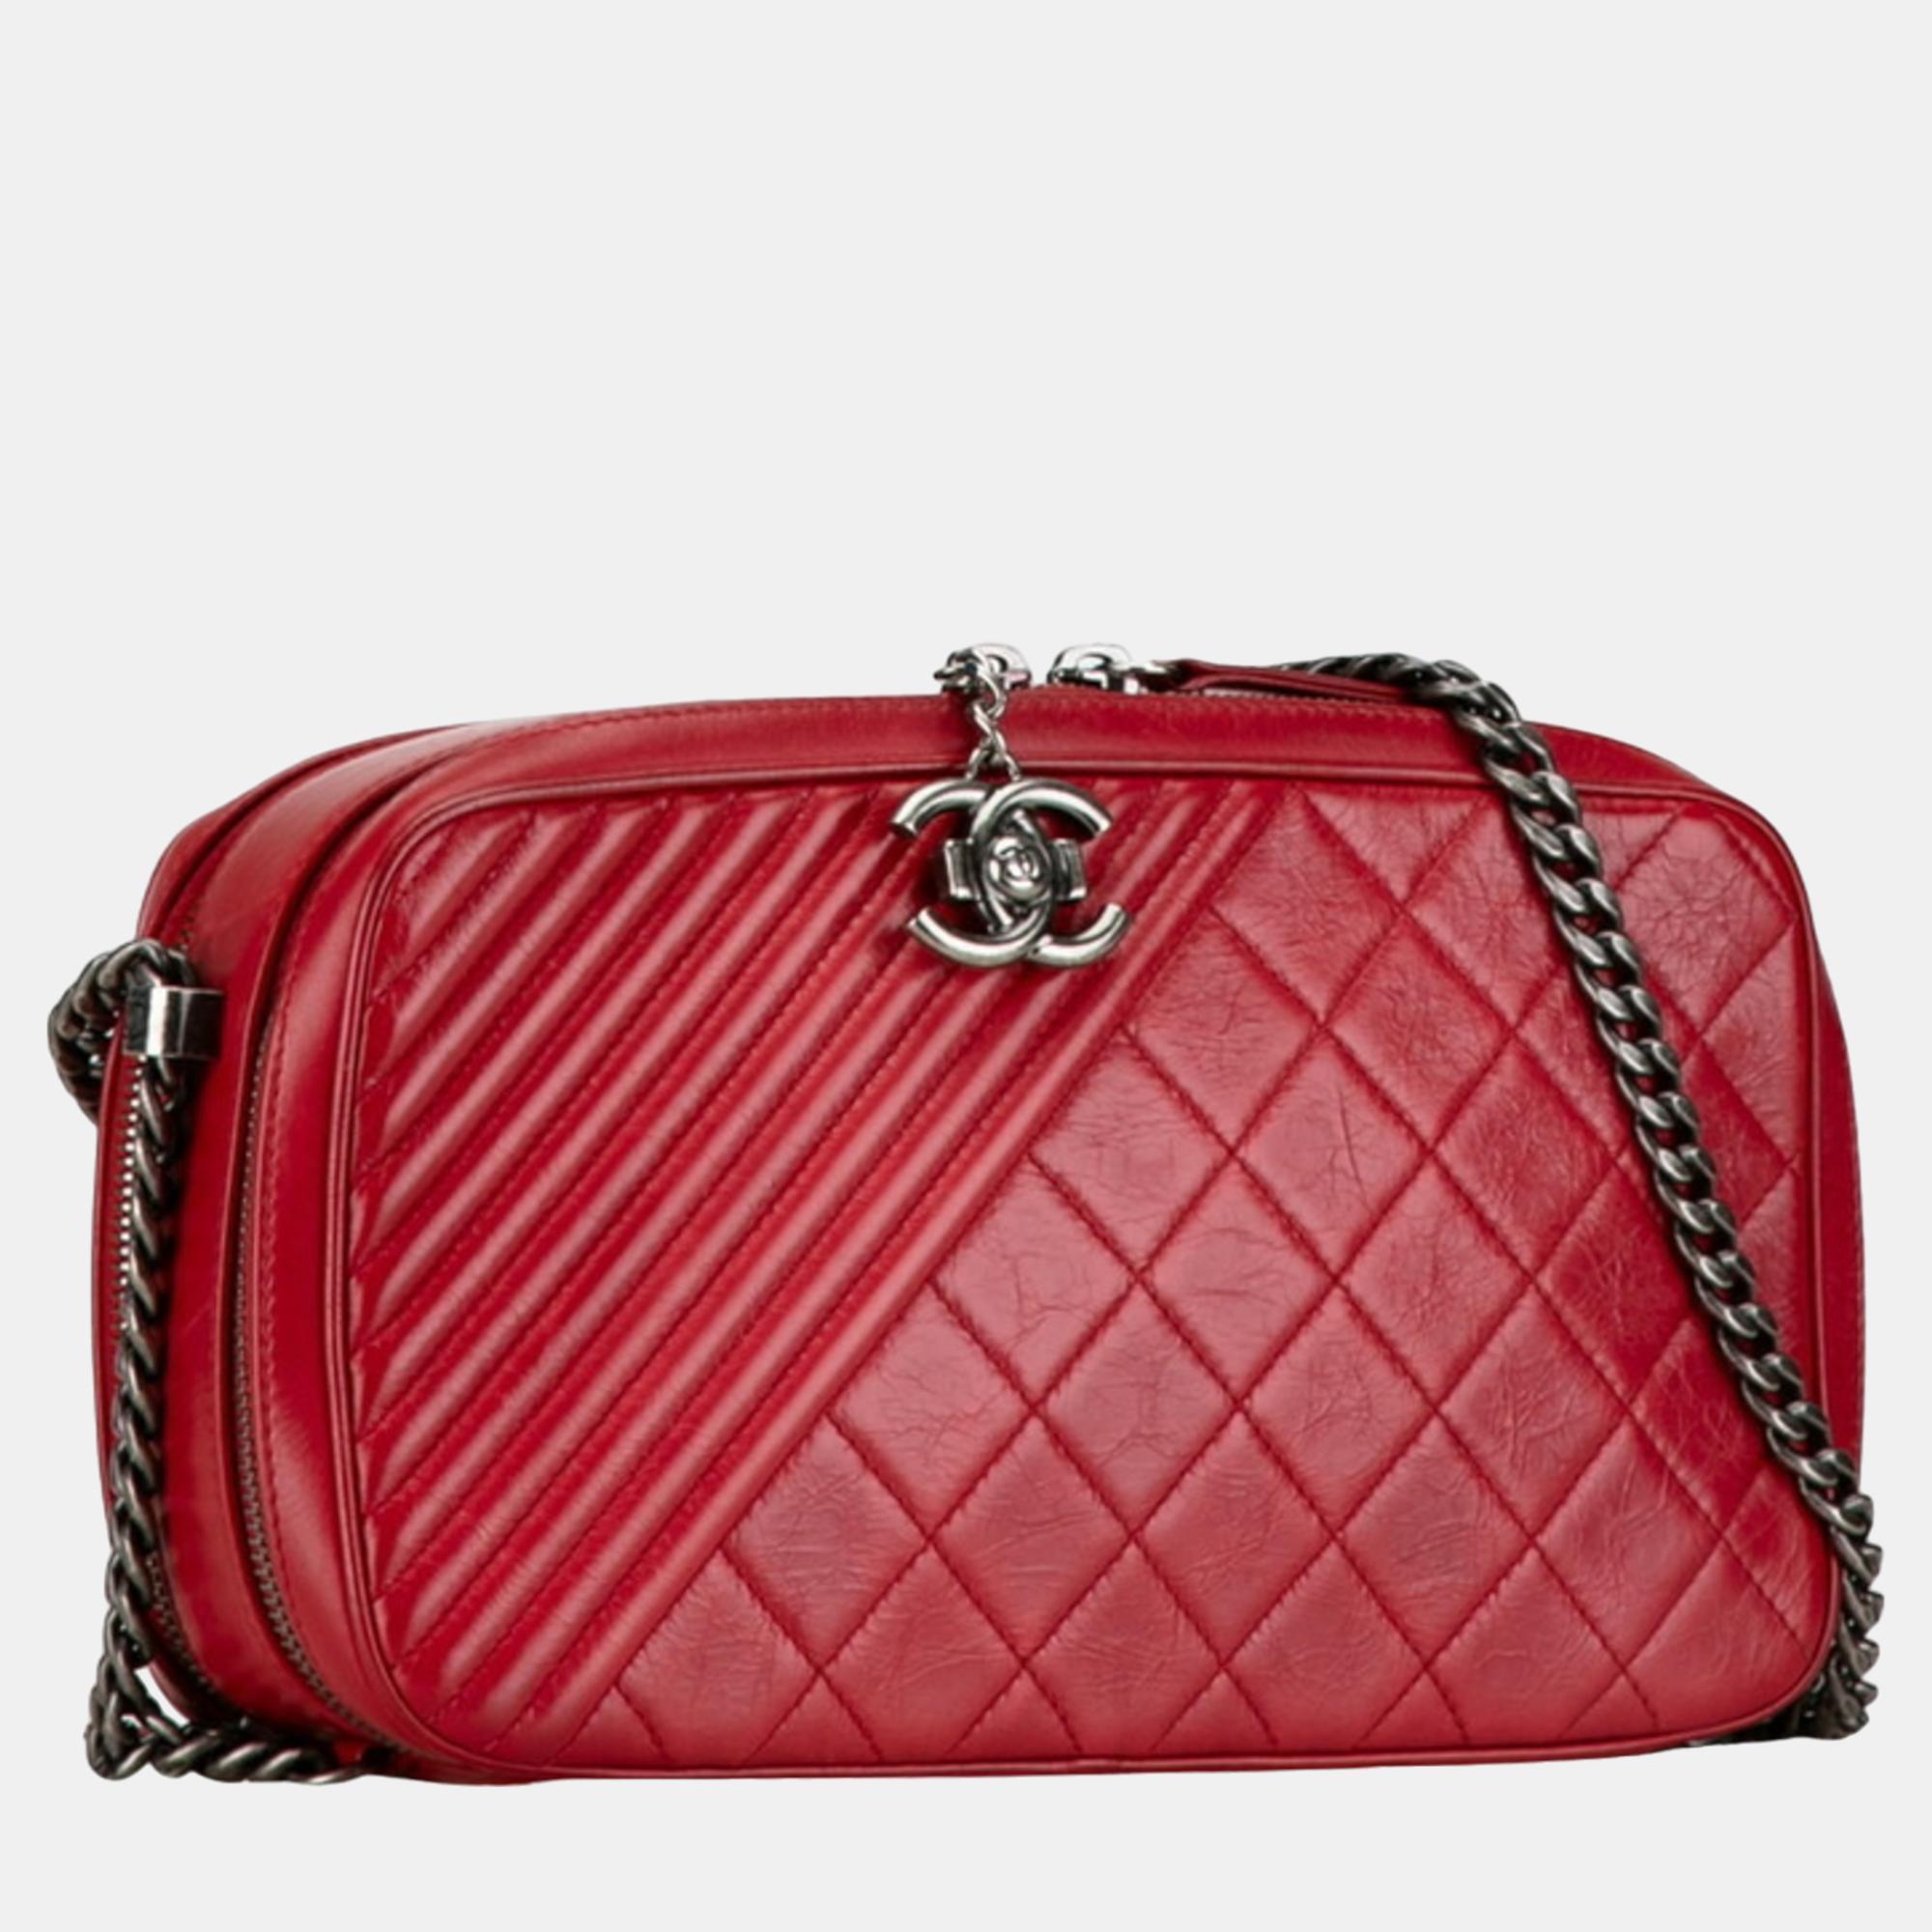 

Chanel Red Lambskin Leather Large Coco Boy Camera Bag